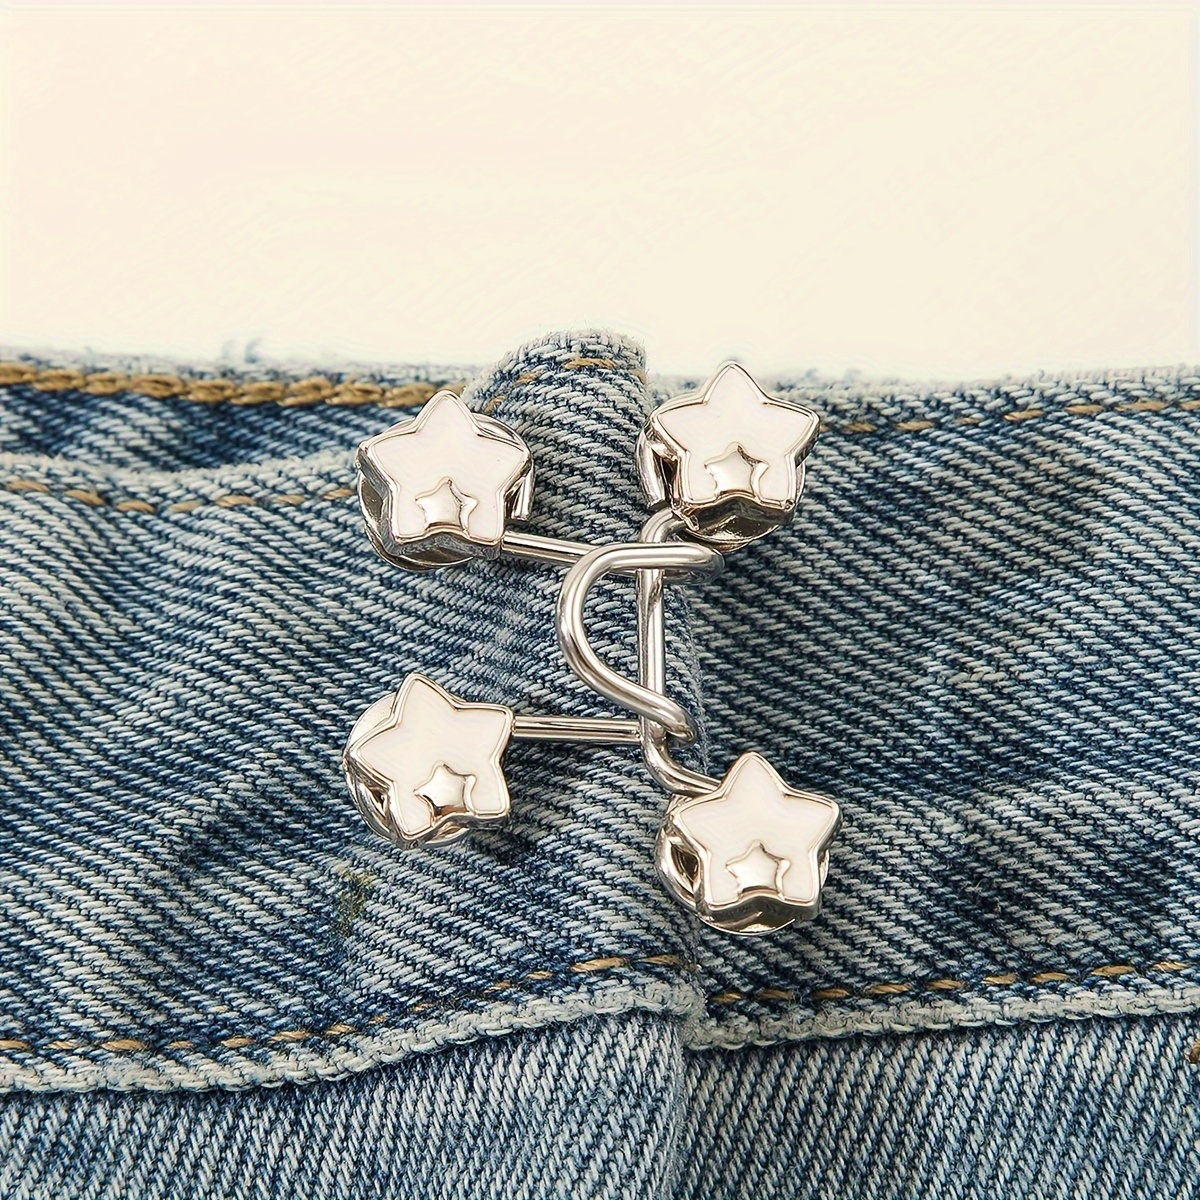 Butterfly Shaped Pants Waist Tightener, Detachable & Adjustable Waistband  Buckle For Jeans, No Sewing Required, With Brooch Accessory